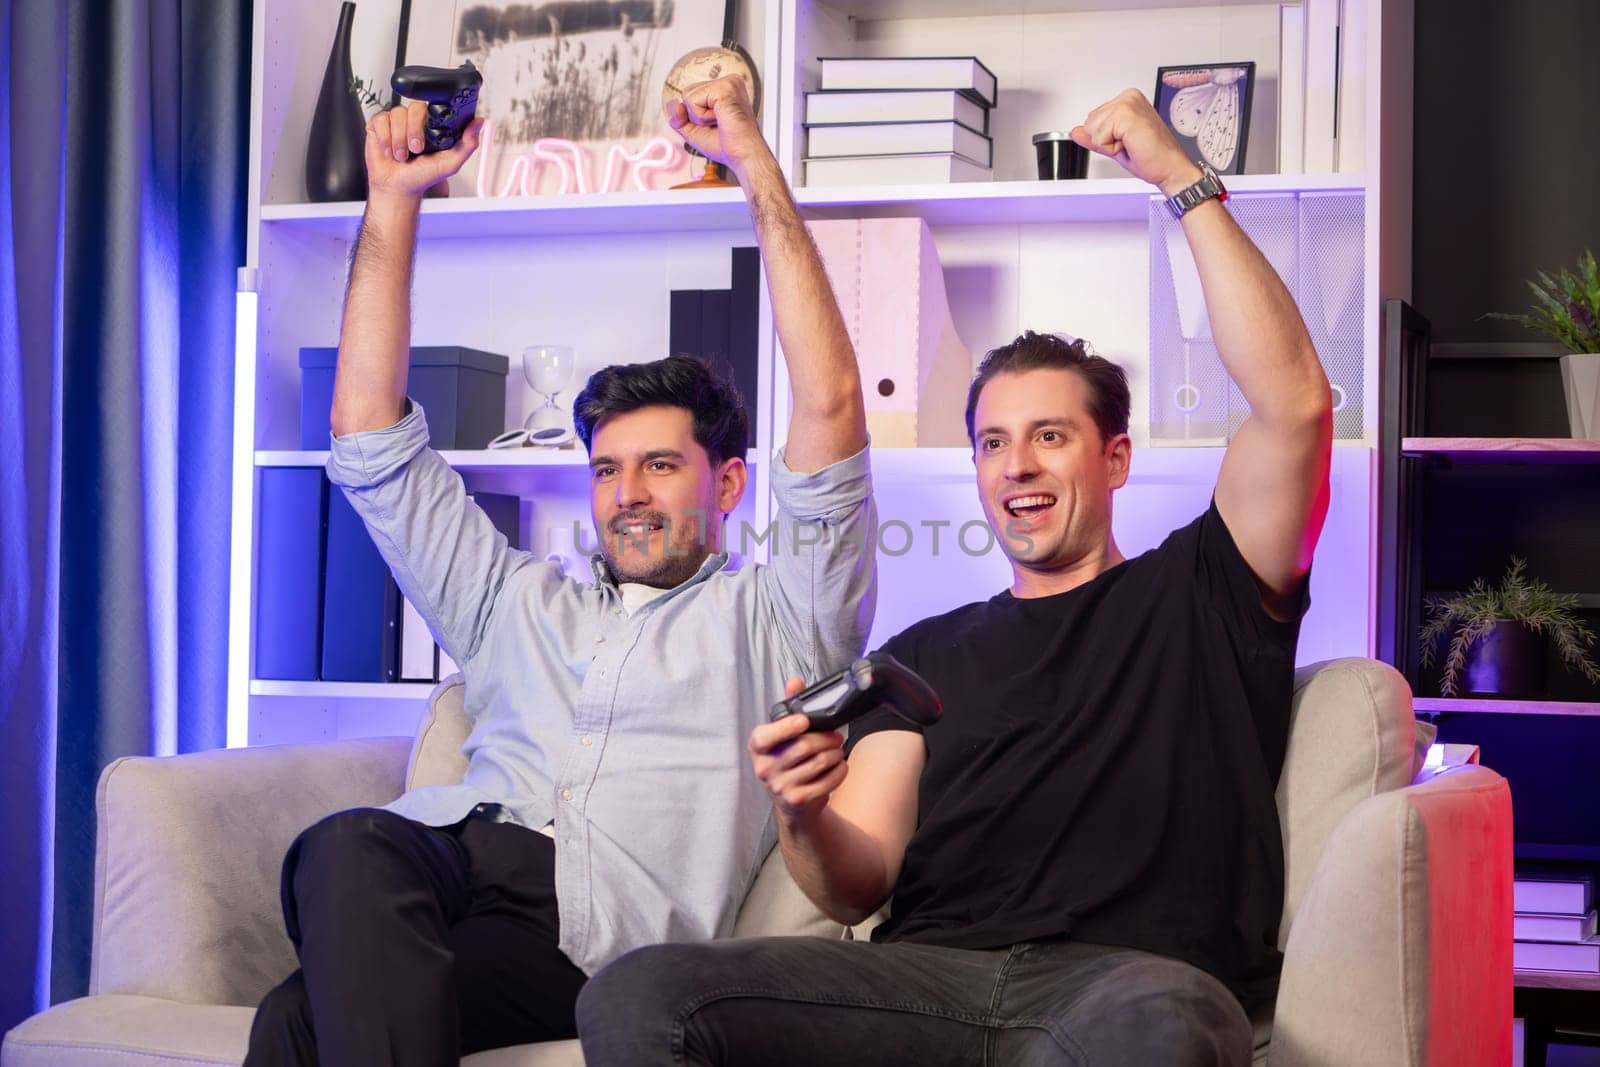 Winner and loser players of buddy friend gamers playing video game on TV using joysticks in studio room with neon blue light. Comfy living indoor at home place with cheerful fighting winner. Sellable.